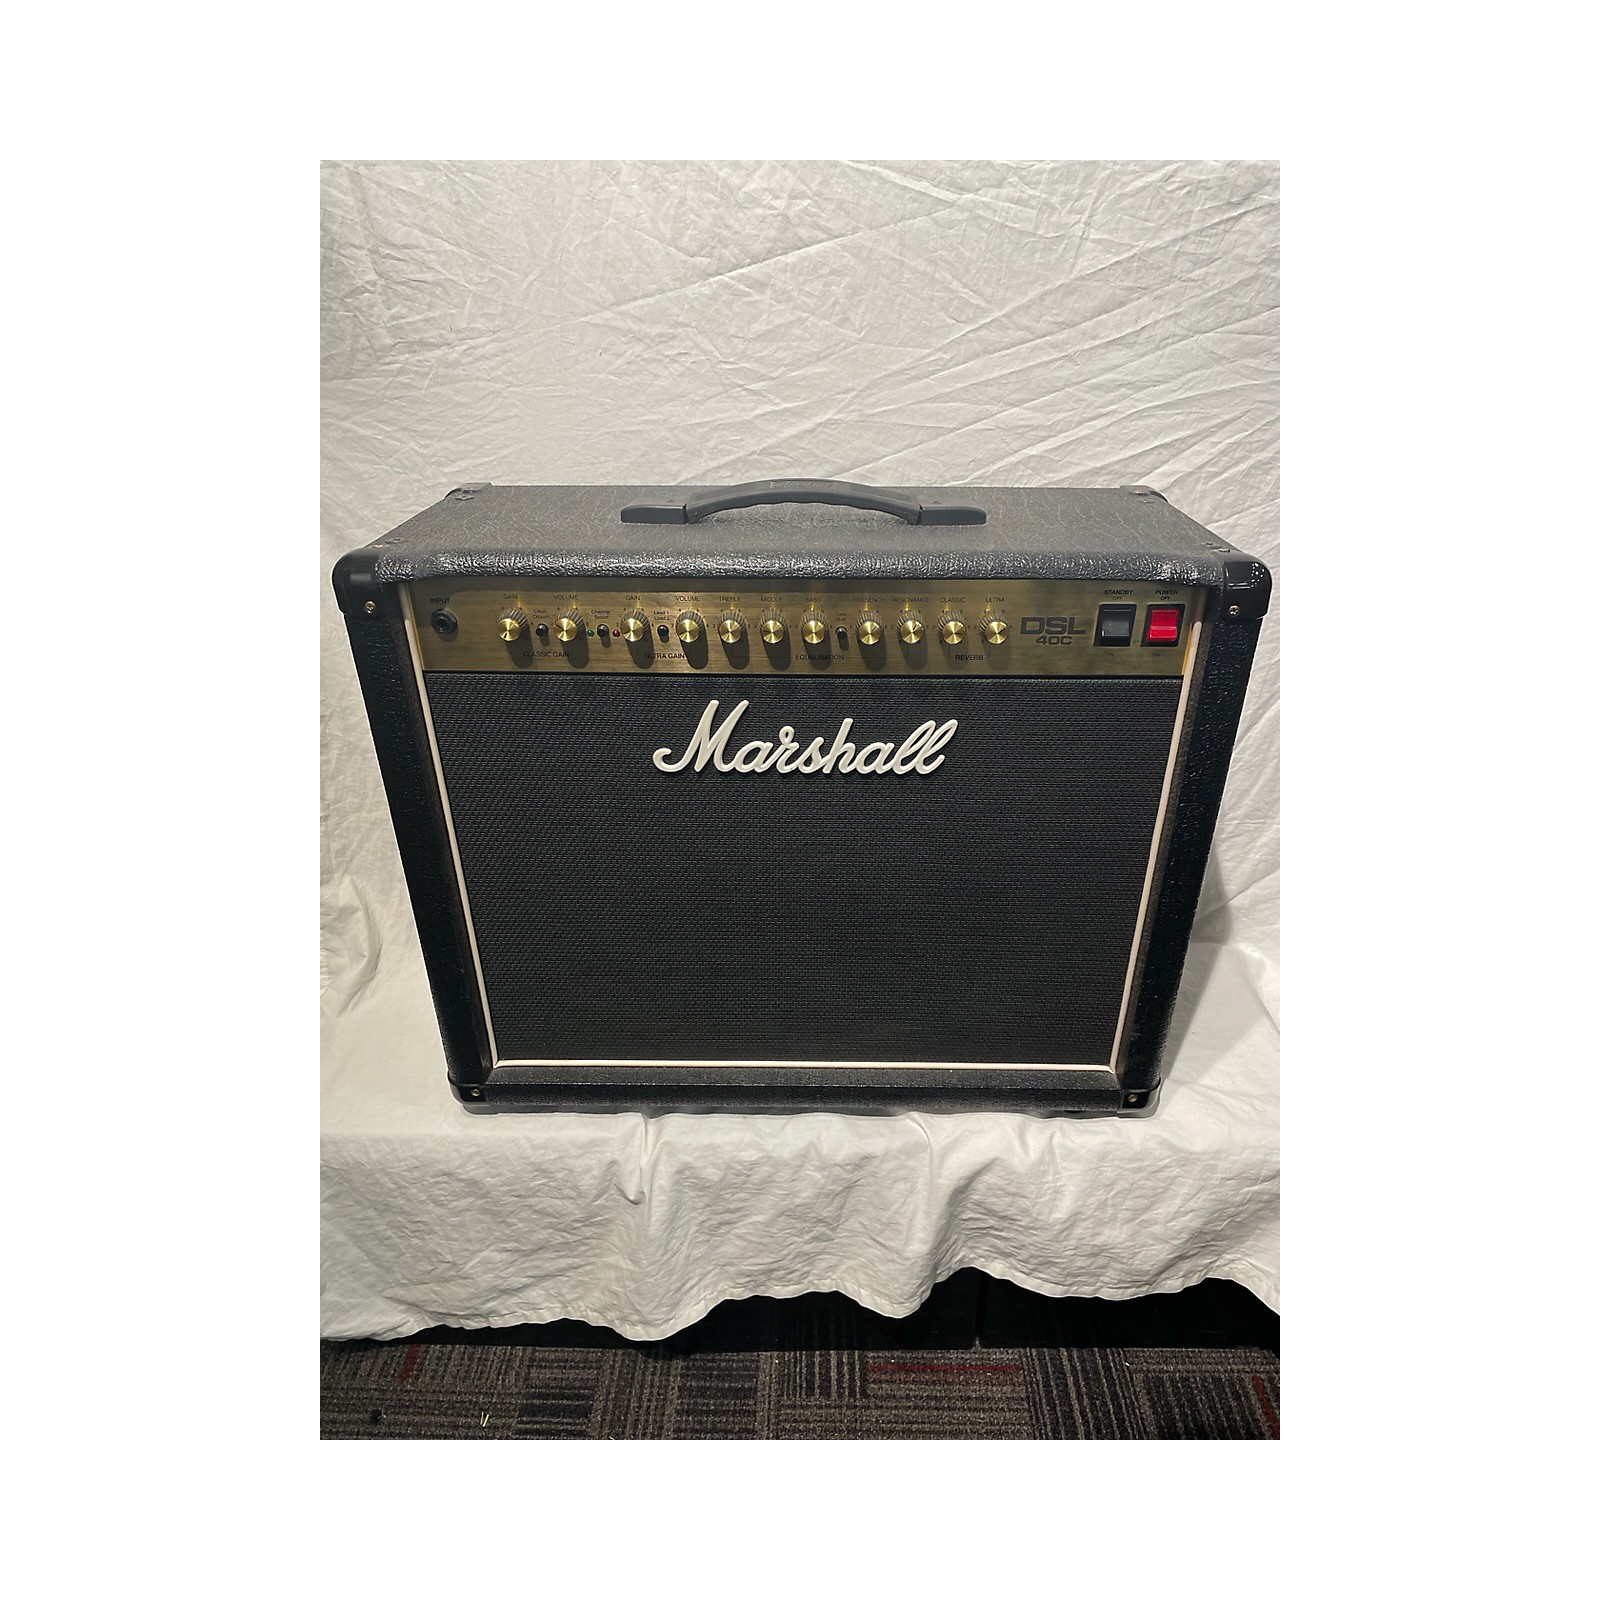 Pre-Owned Marshall DSL 40C - Five Star Guitars